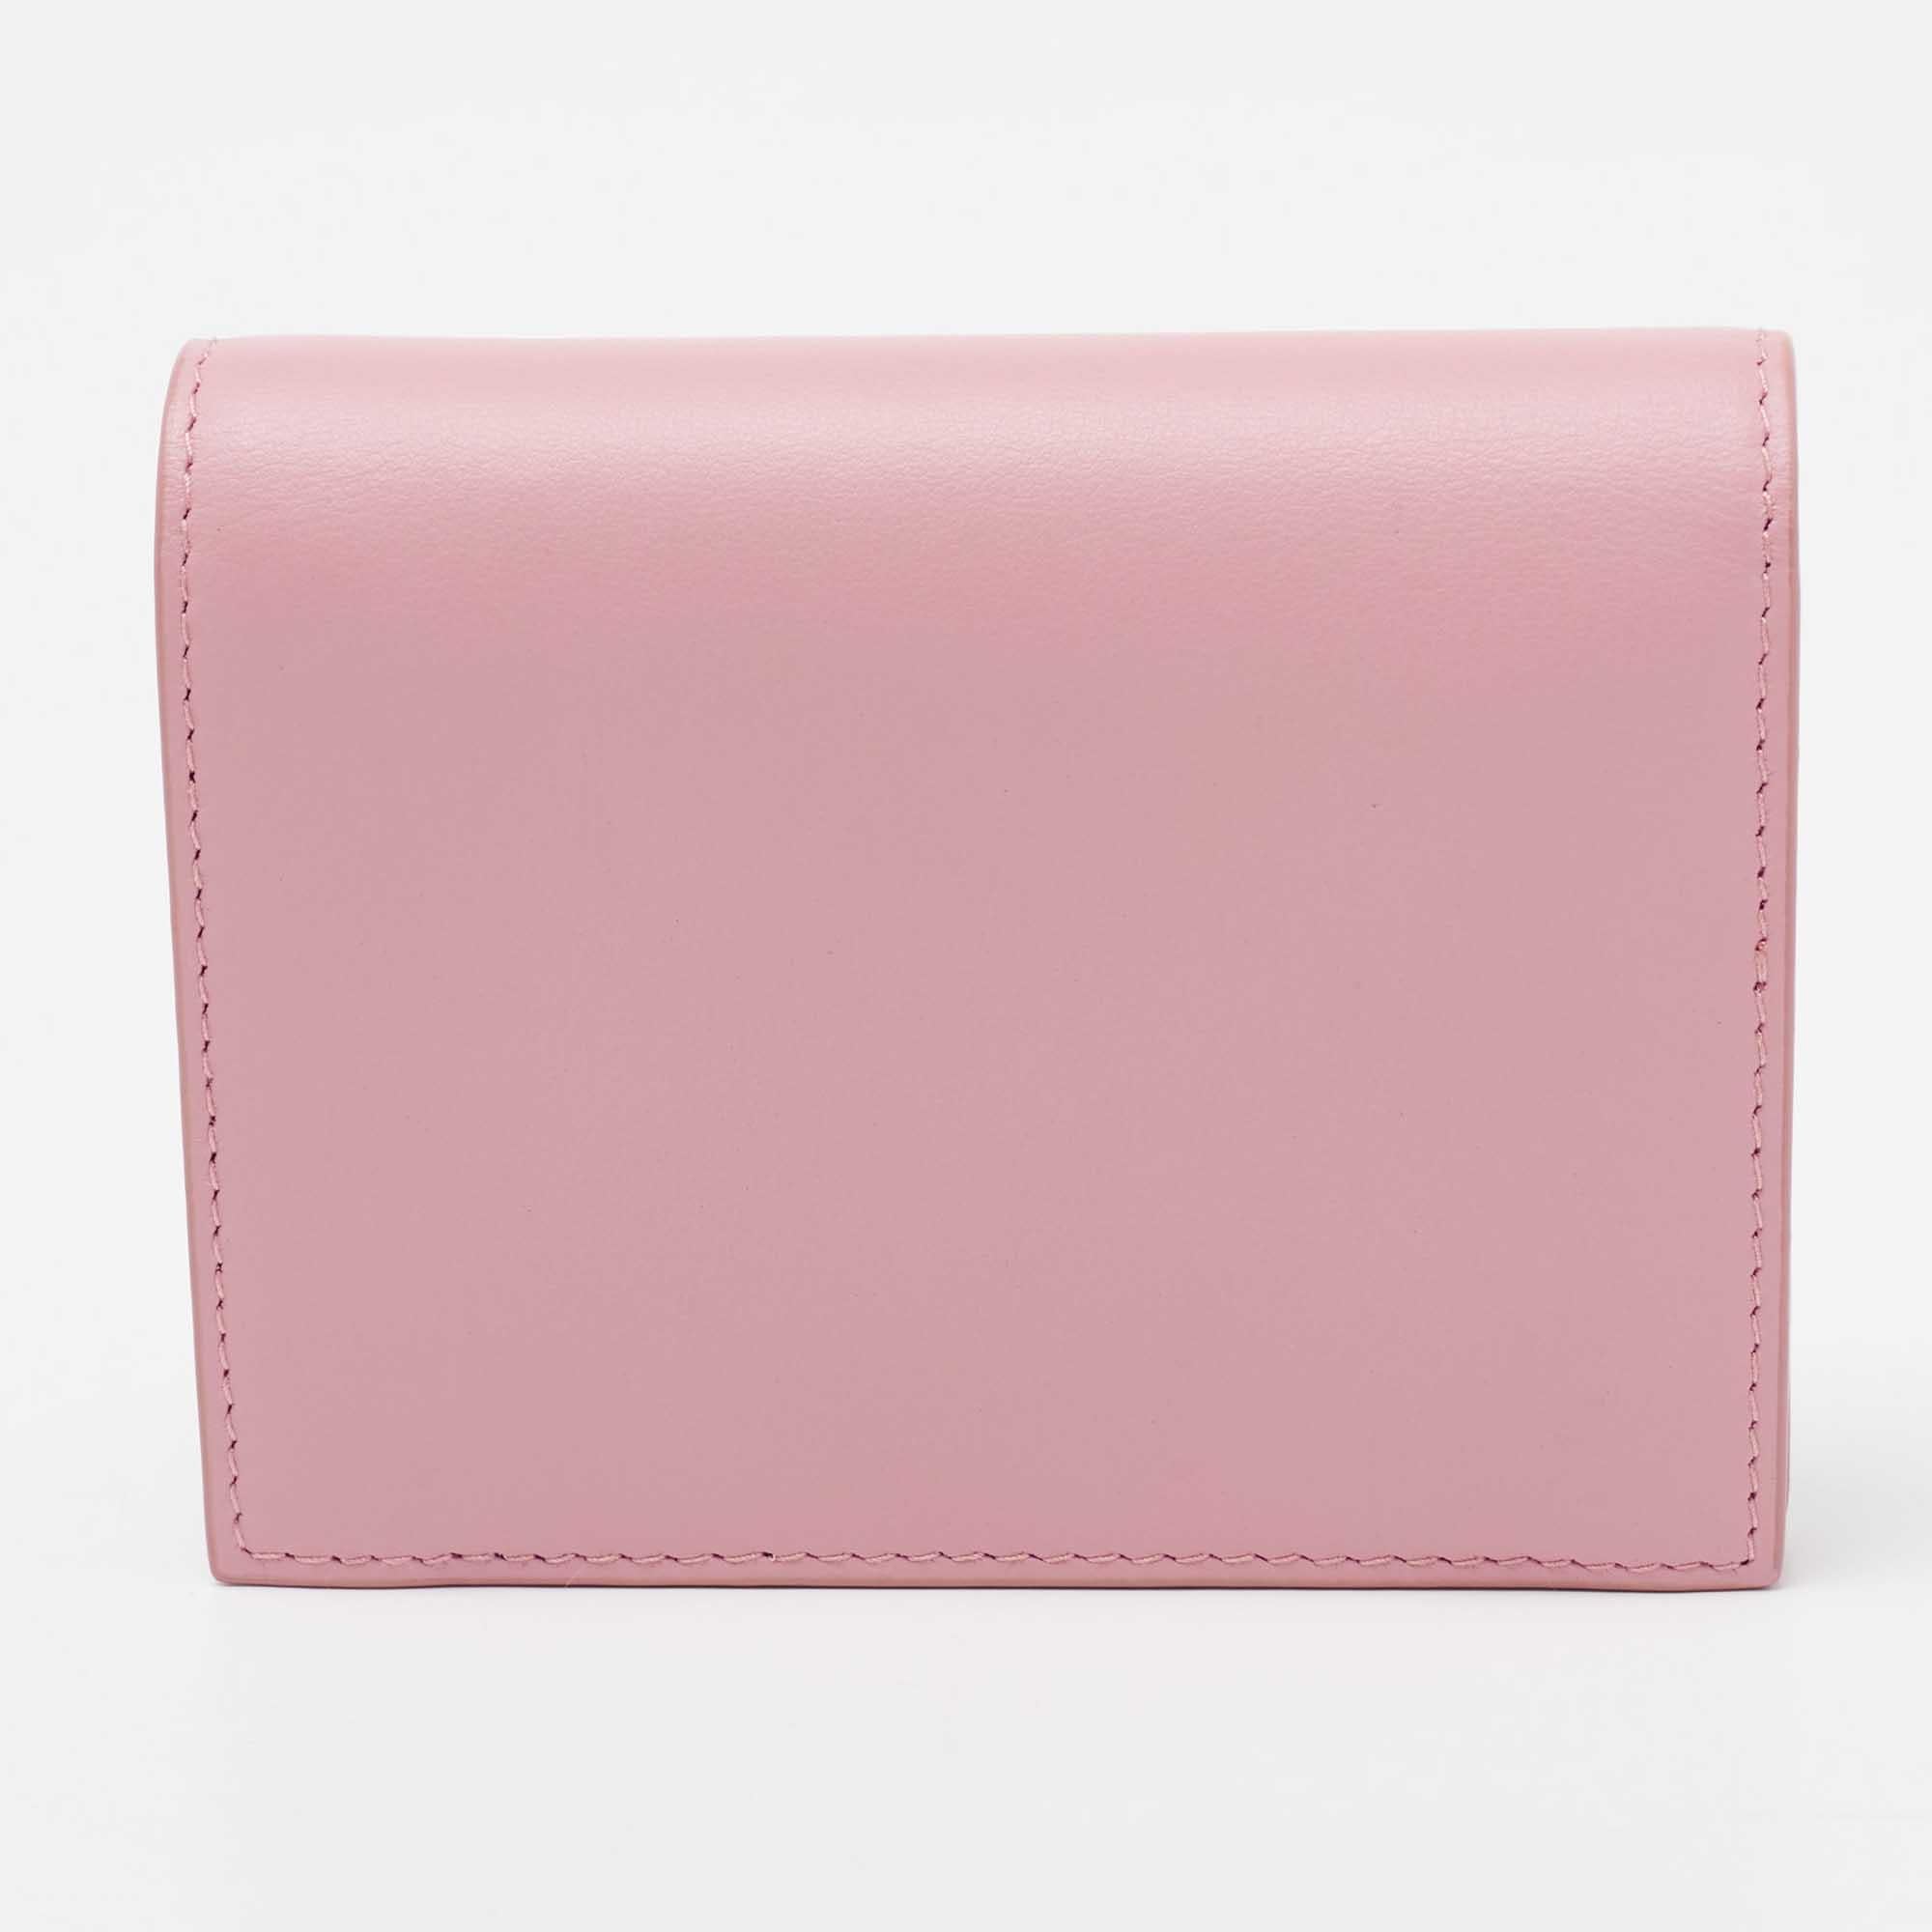 The cute bow detailing and the brand signature decorate the pink exterior of this Miu Miu wallet. Crafted from leather, its compartmentalized interior will keep your monetary essentials organized.

Includes: Original Box, Authenticity Card, Info Card